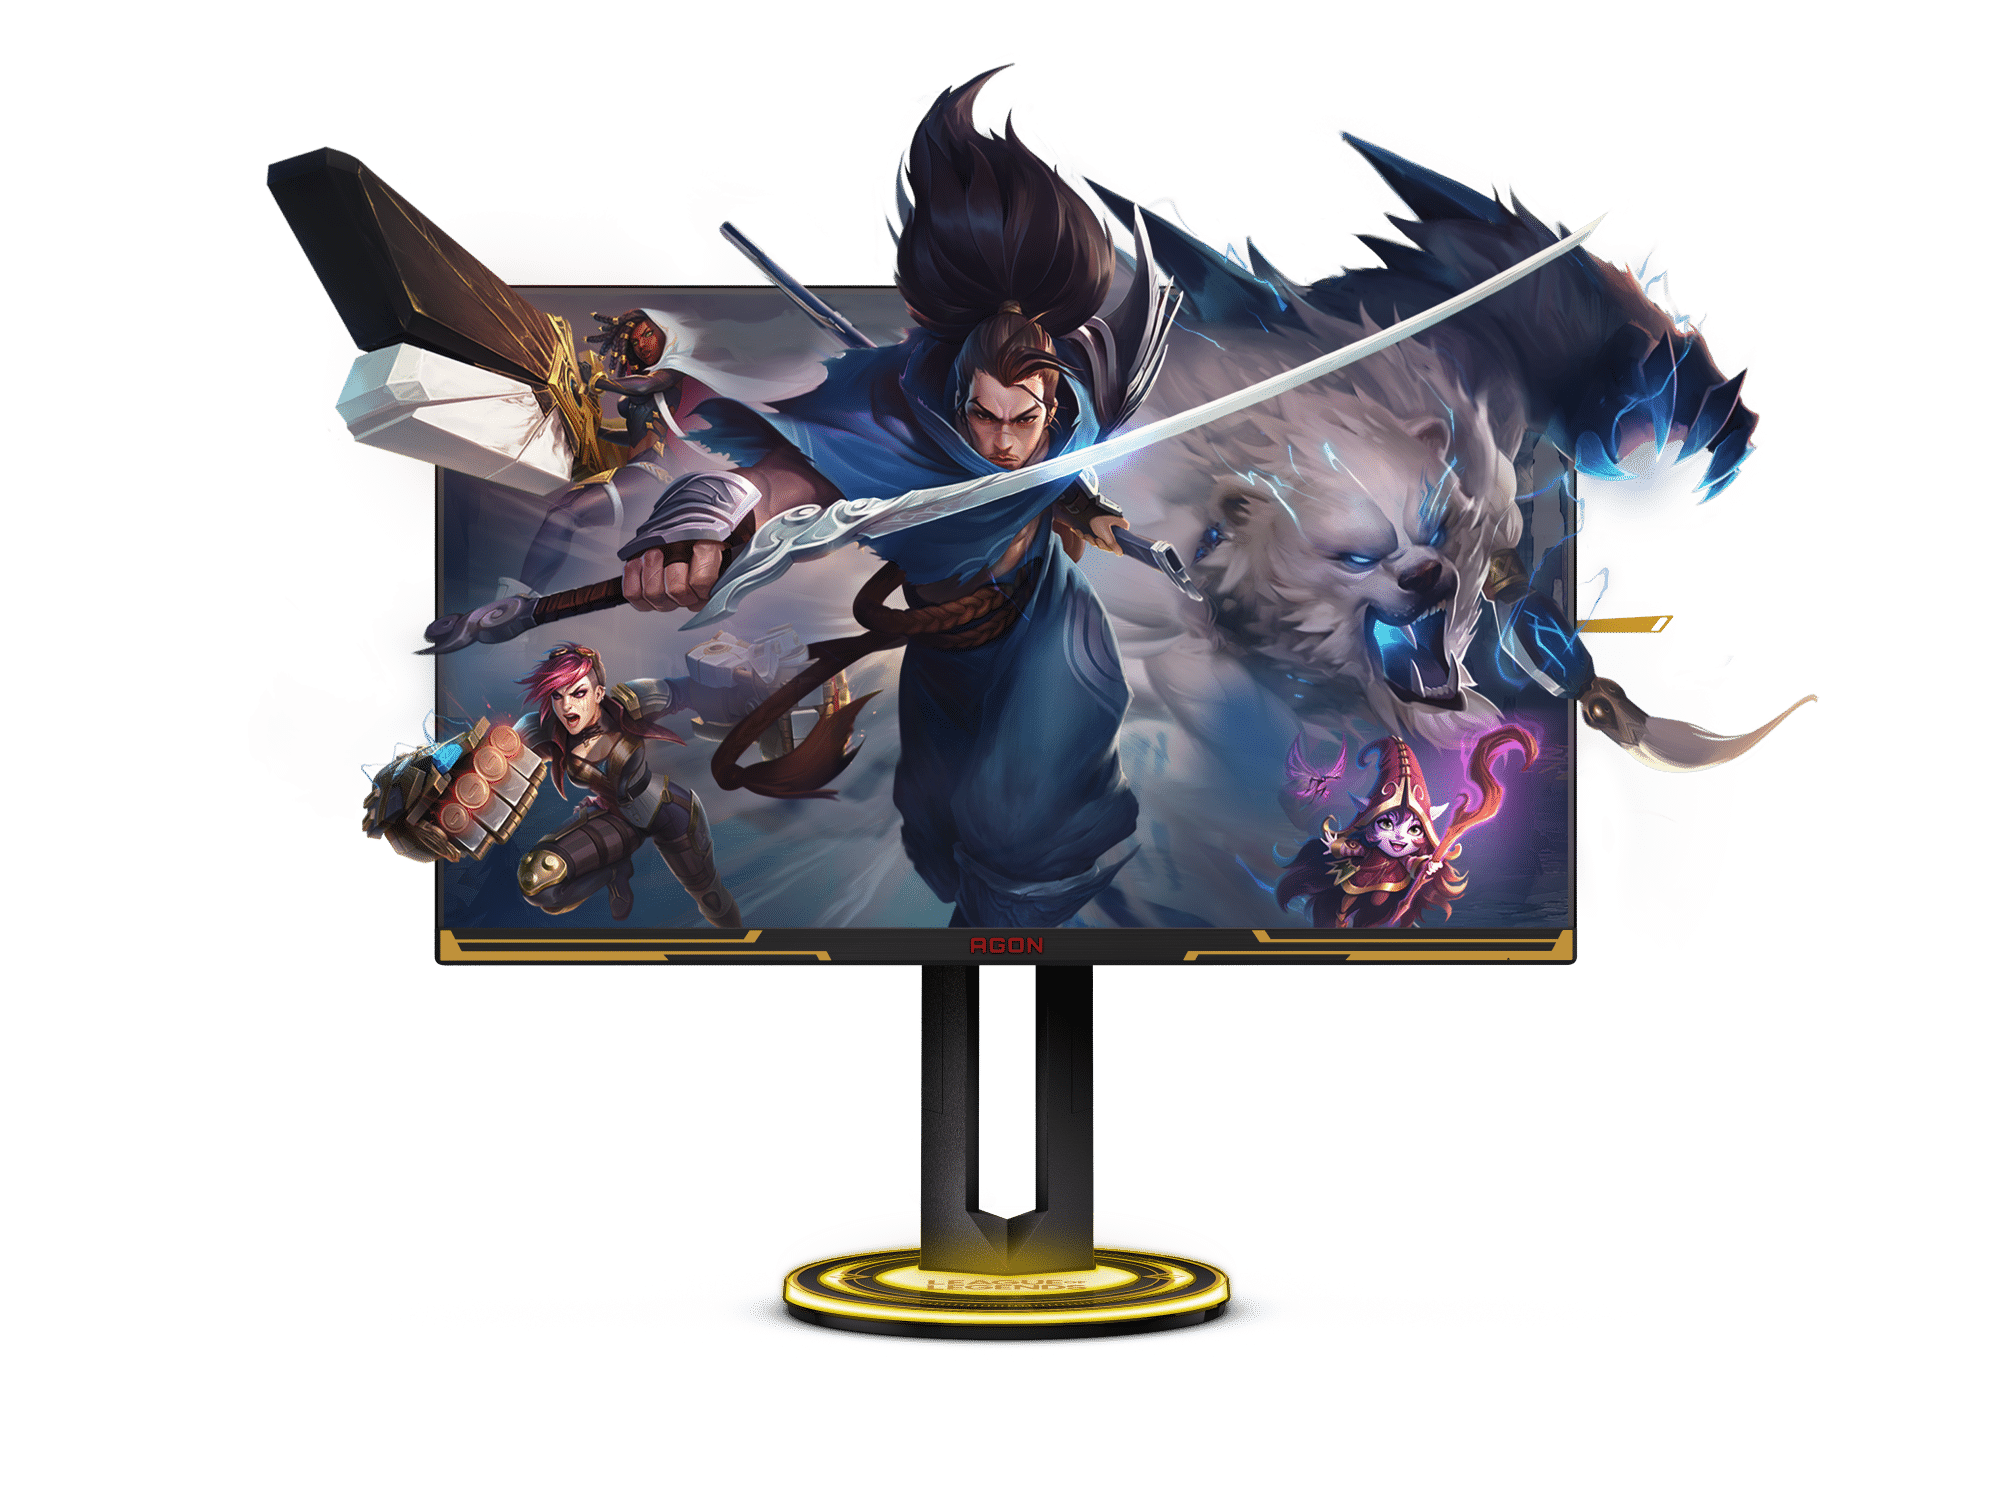 AOC AG275QXL AGON PRO 27" LOL Special Edition IPS QHD G-Sync Compatible Premium Gaming Monitor. 1ms, 170Hz , HDR 400 ,HDMI2.0,DP, USB 3.2 x 4, LoL Boot Up Screen, Sound, Game mode